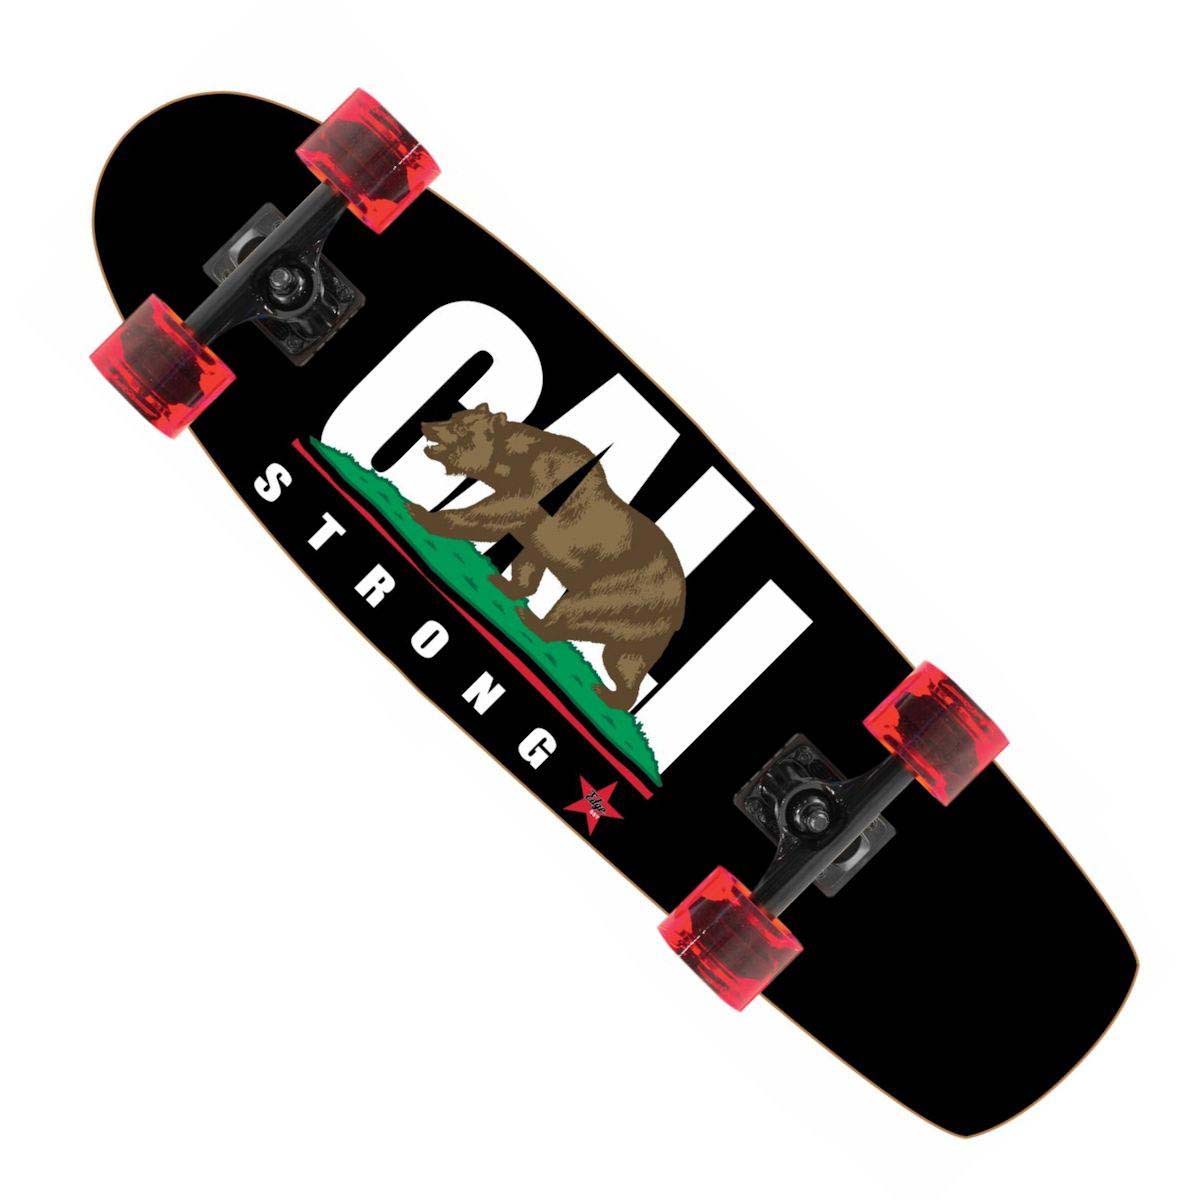 CALI Strong Skateboard Cruiser Complete - Cruisers - Image 1 - CALI Strong